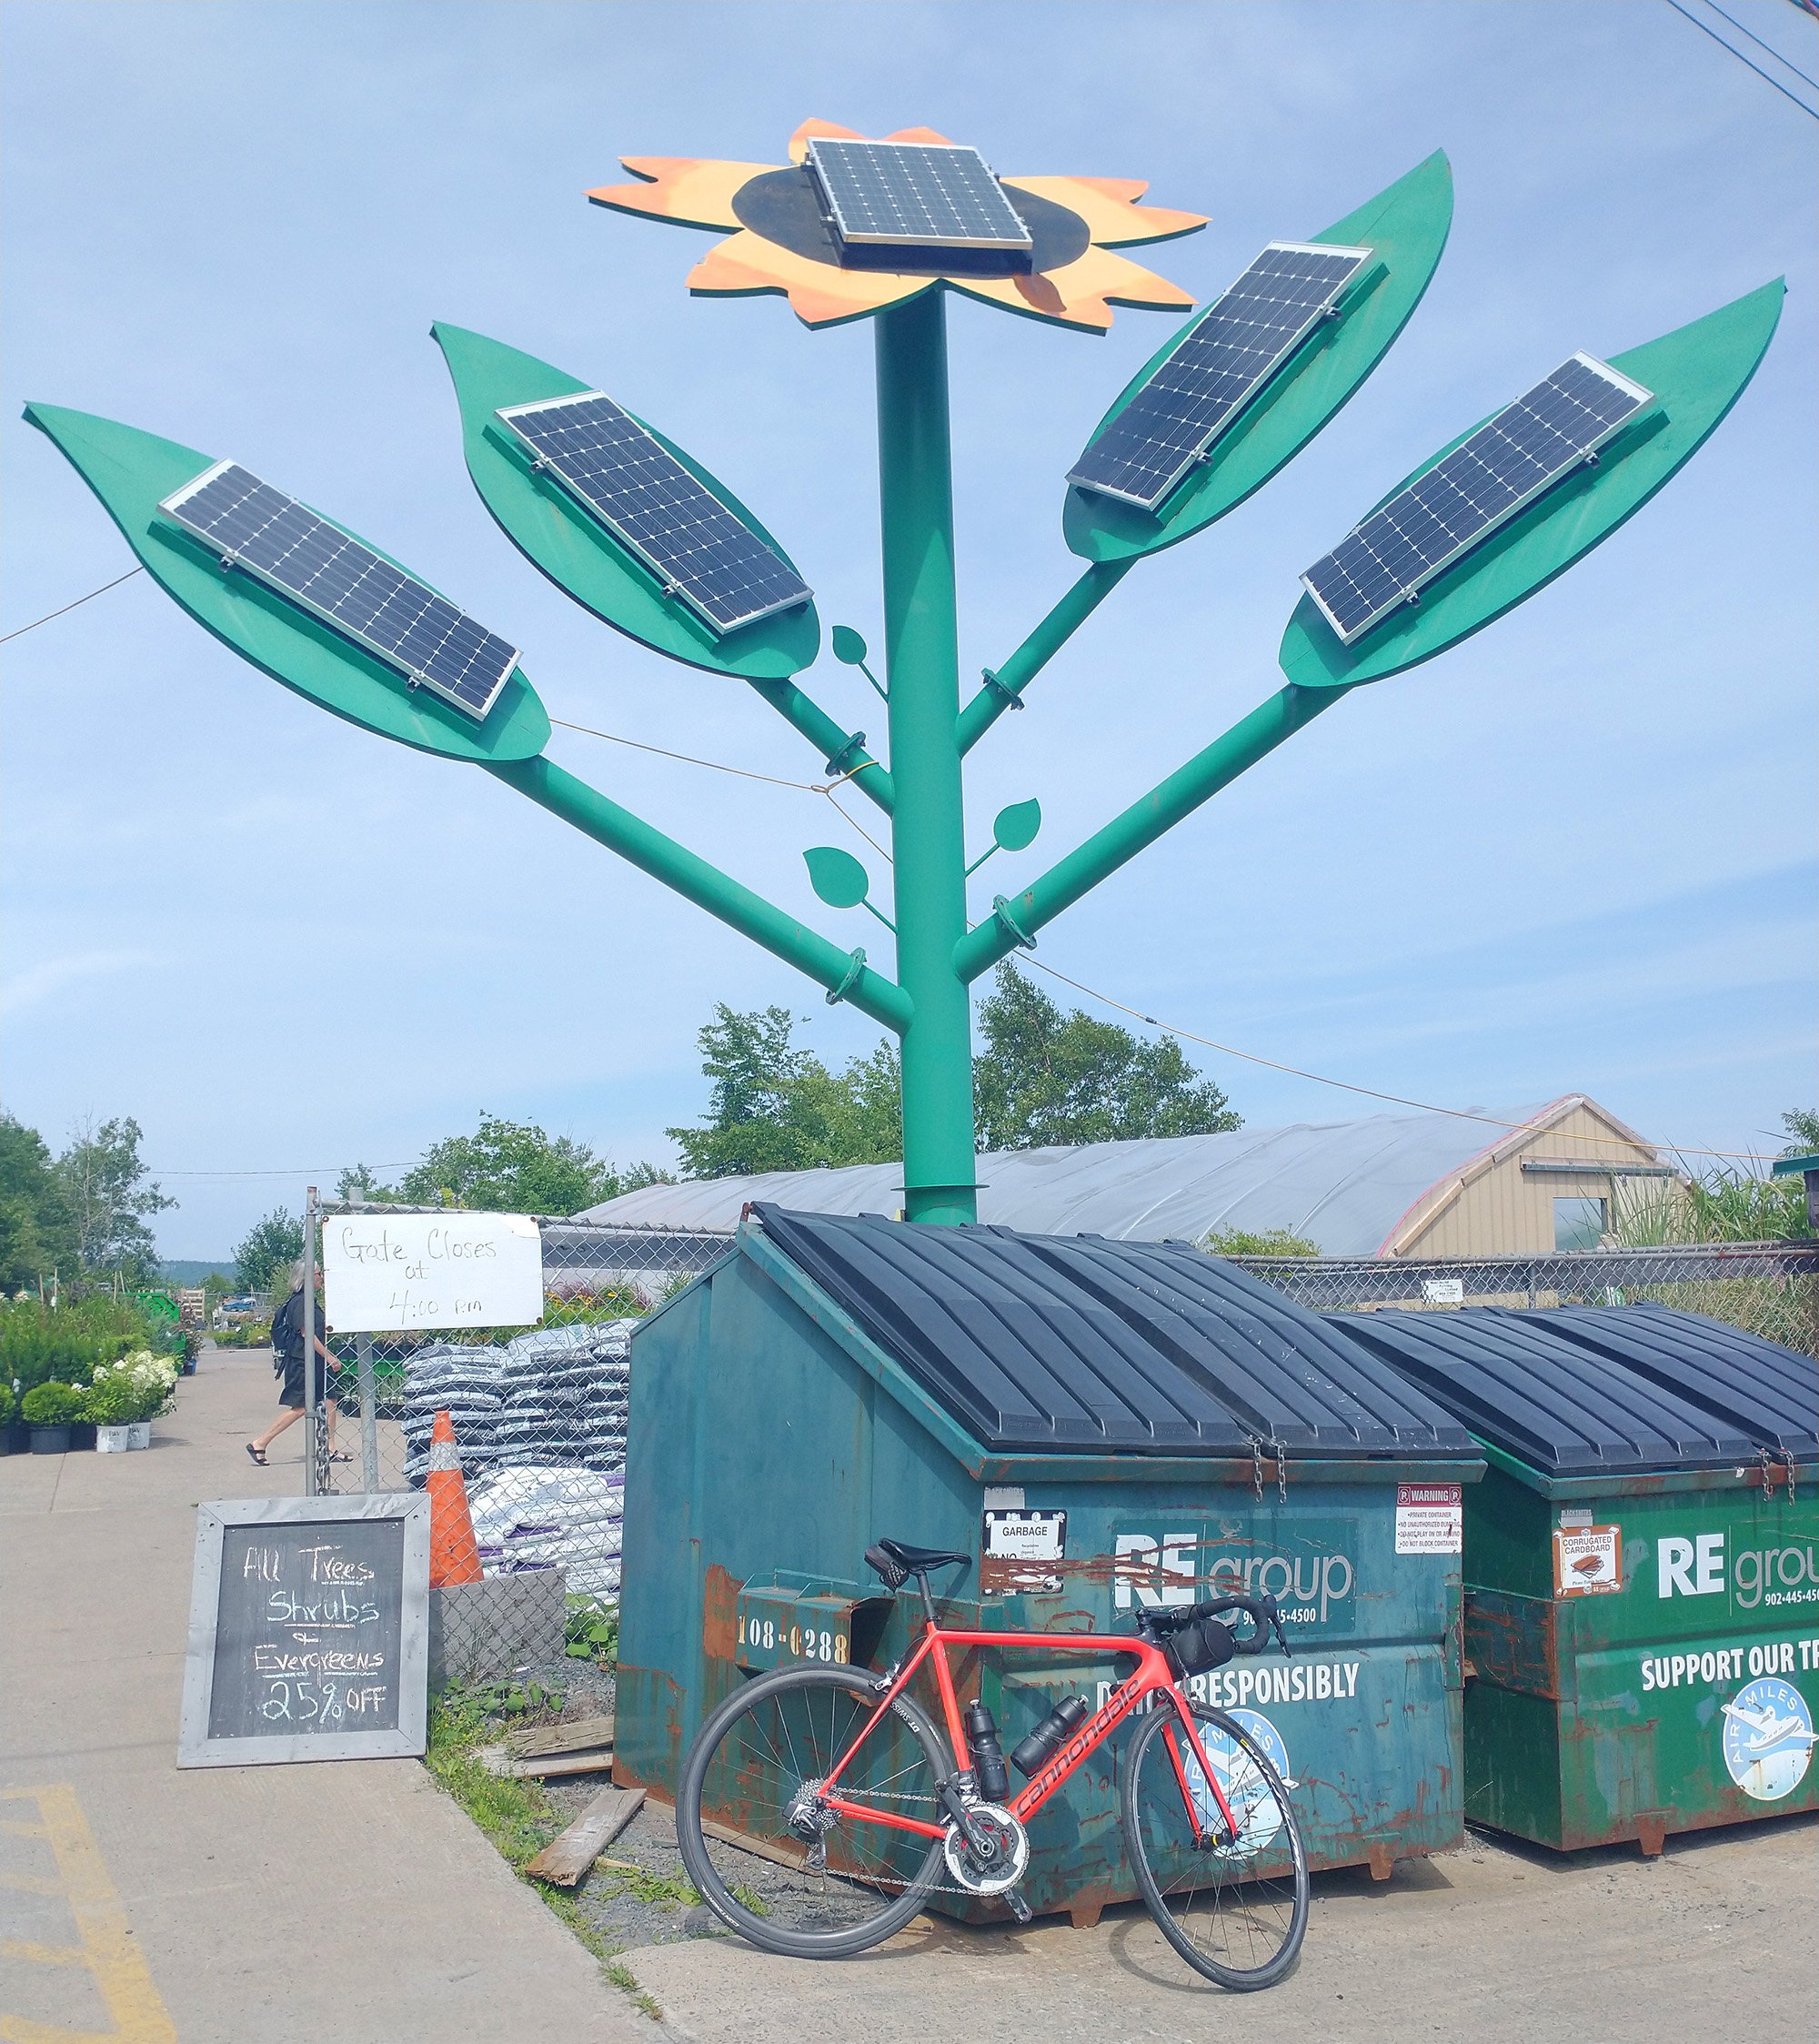 Passed by this cool solar sunflower at a garden center. Love taking pictures of big things and my butt was hurting a lot so it's an excuse to get off the bike.